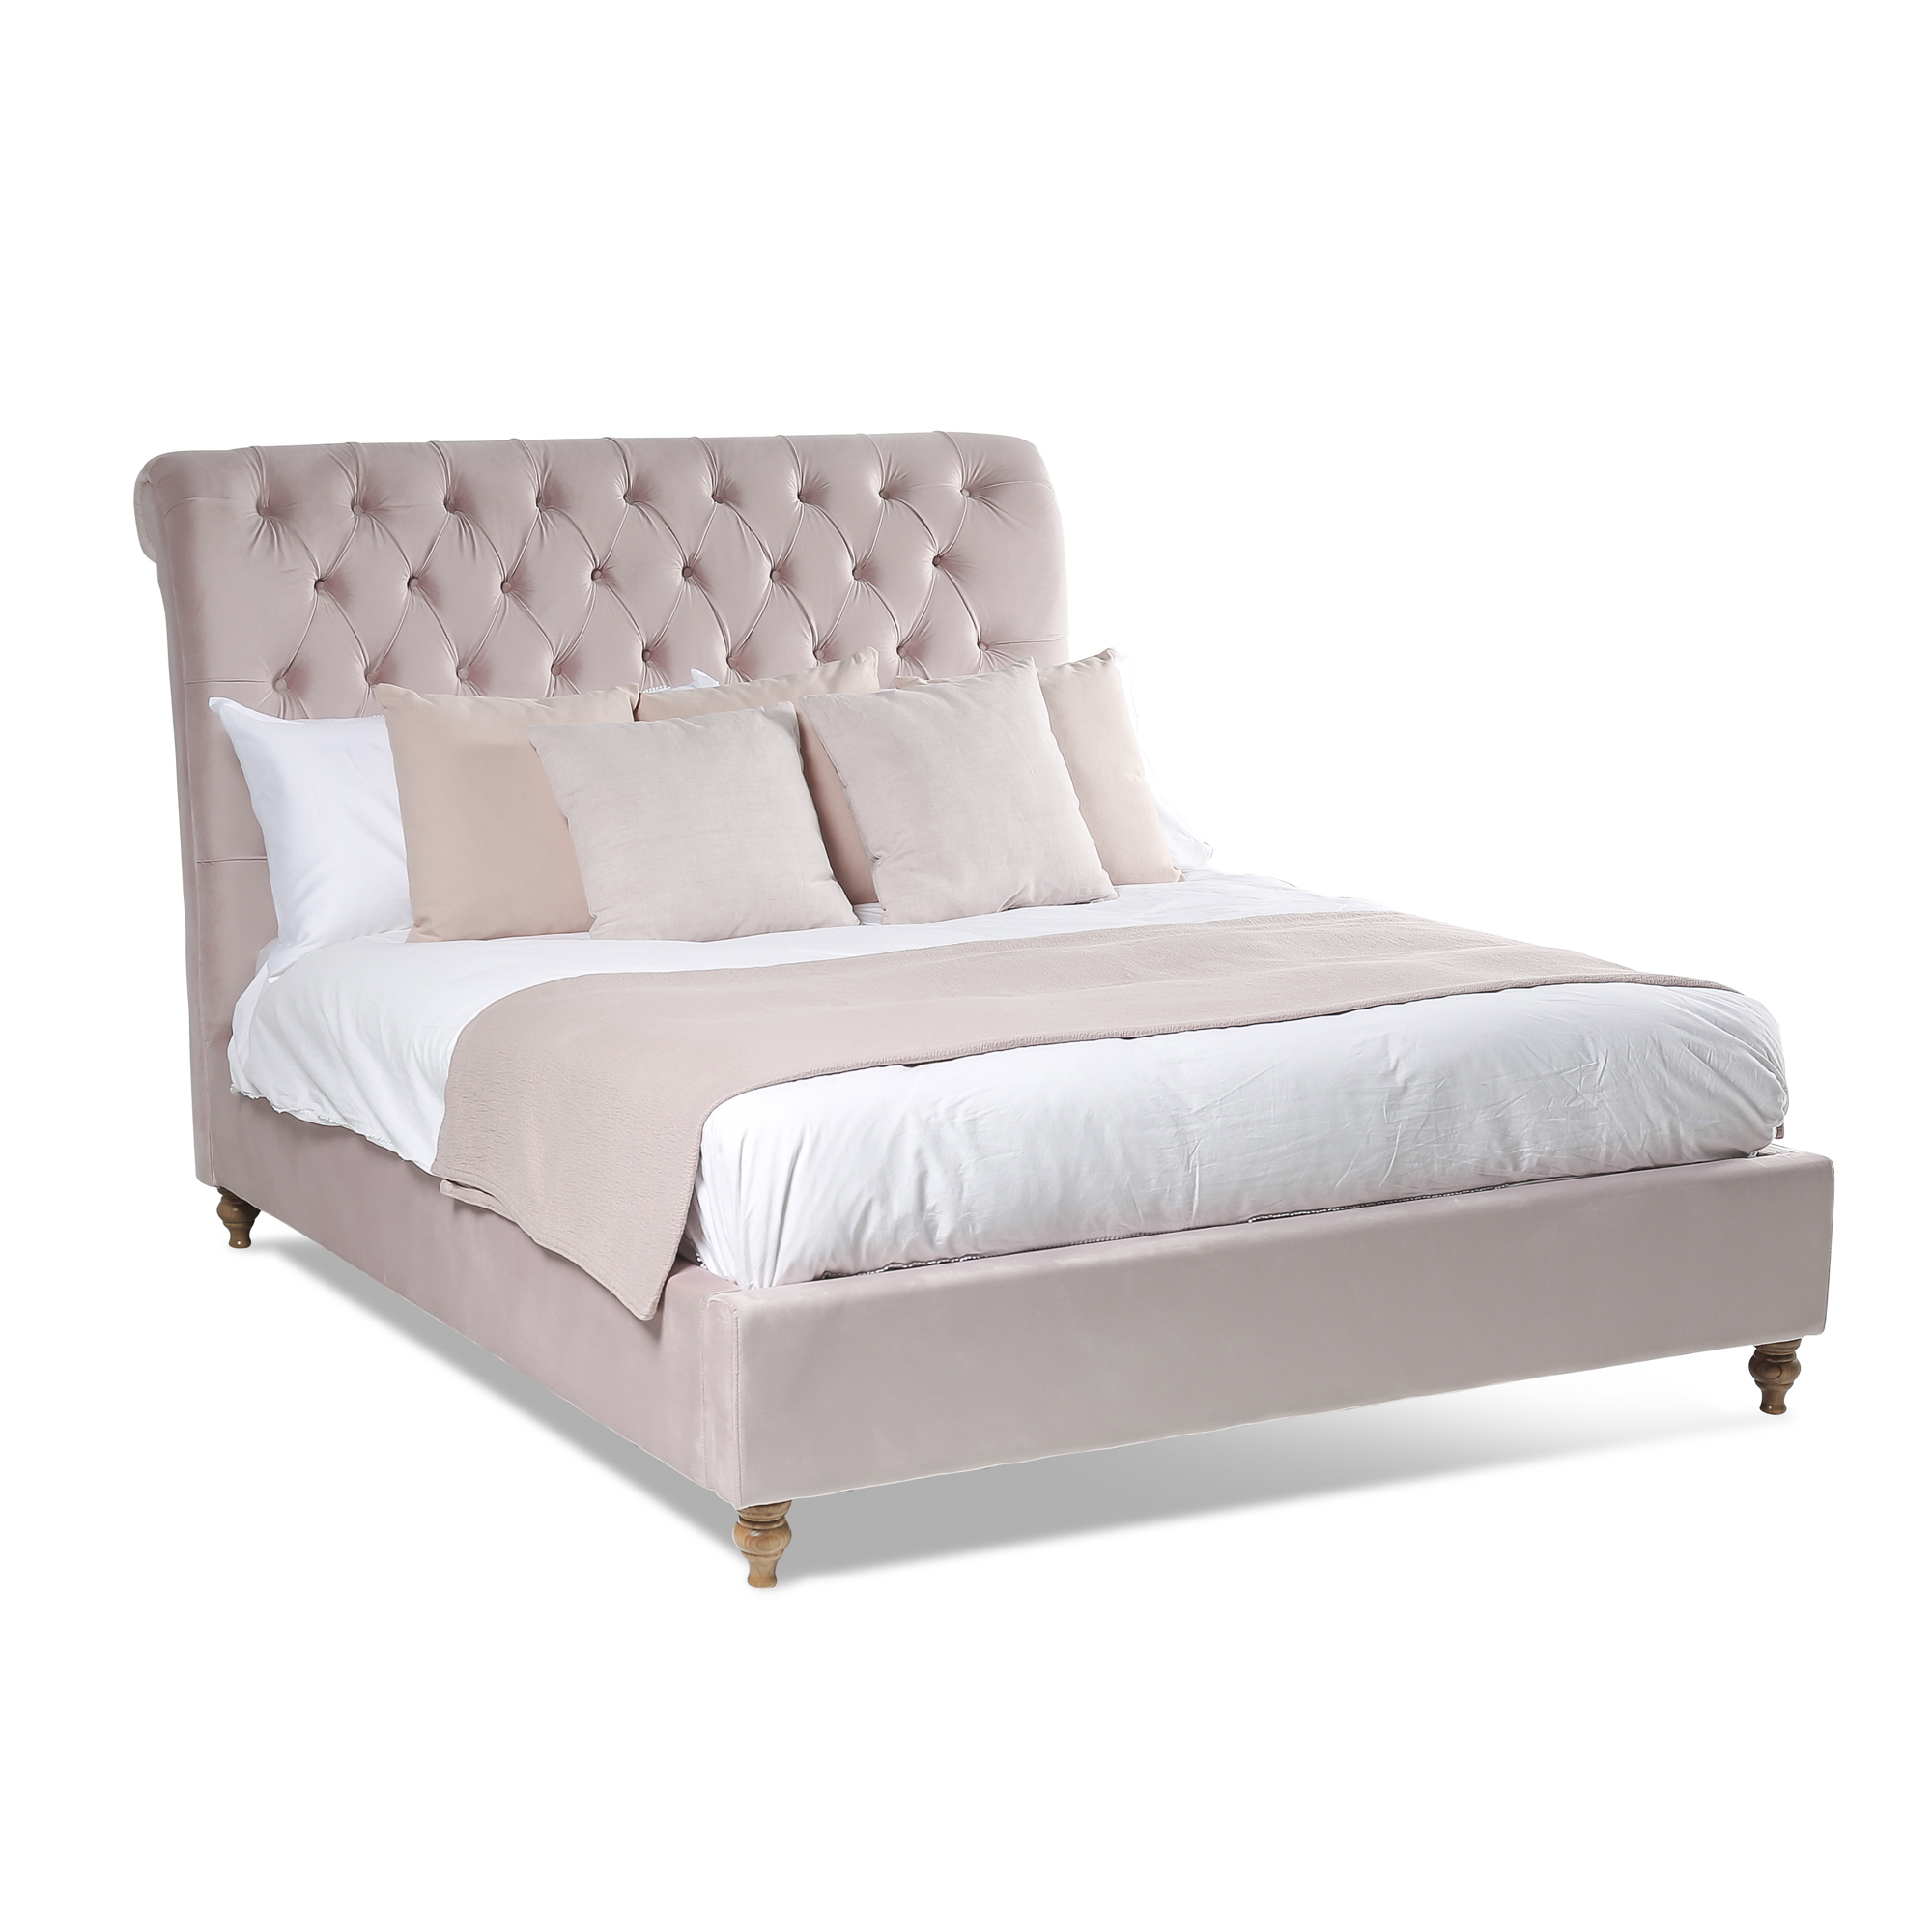 Luxury Chesterfield King Size Bed In, Pink Velvet King Size Bedding